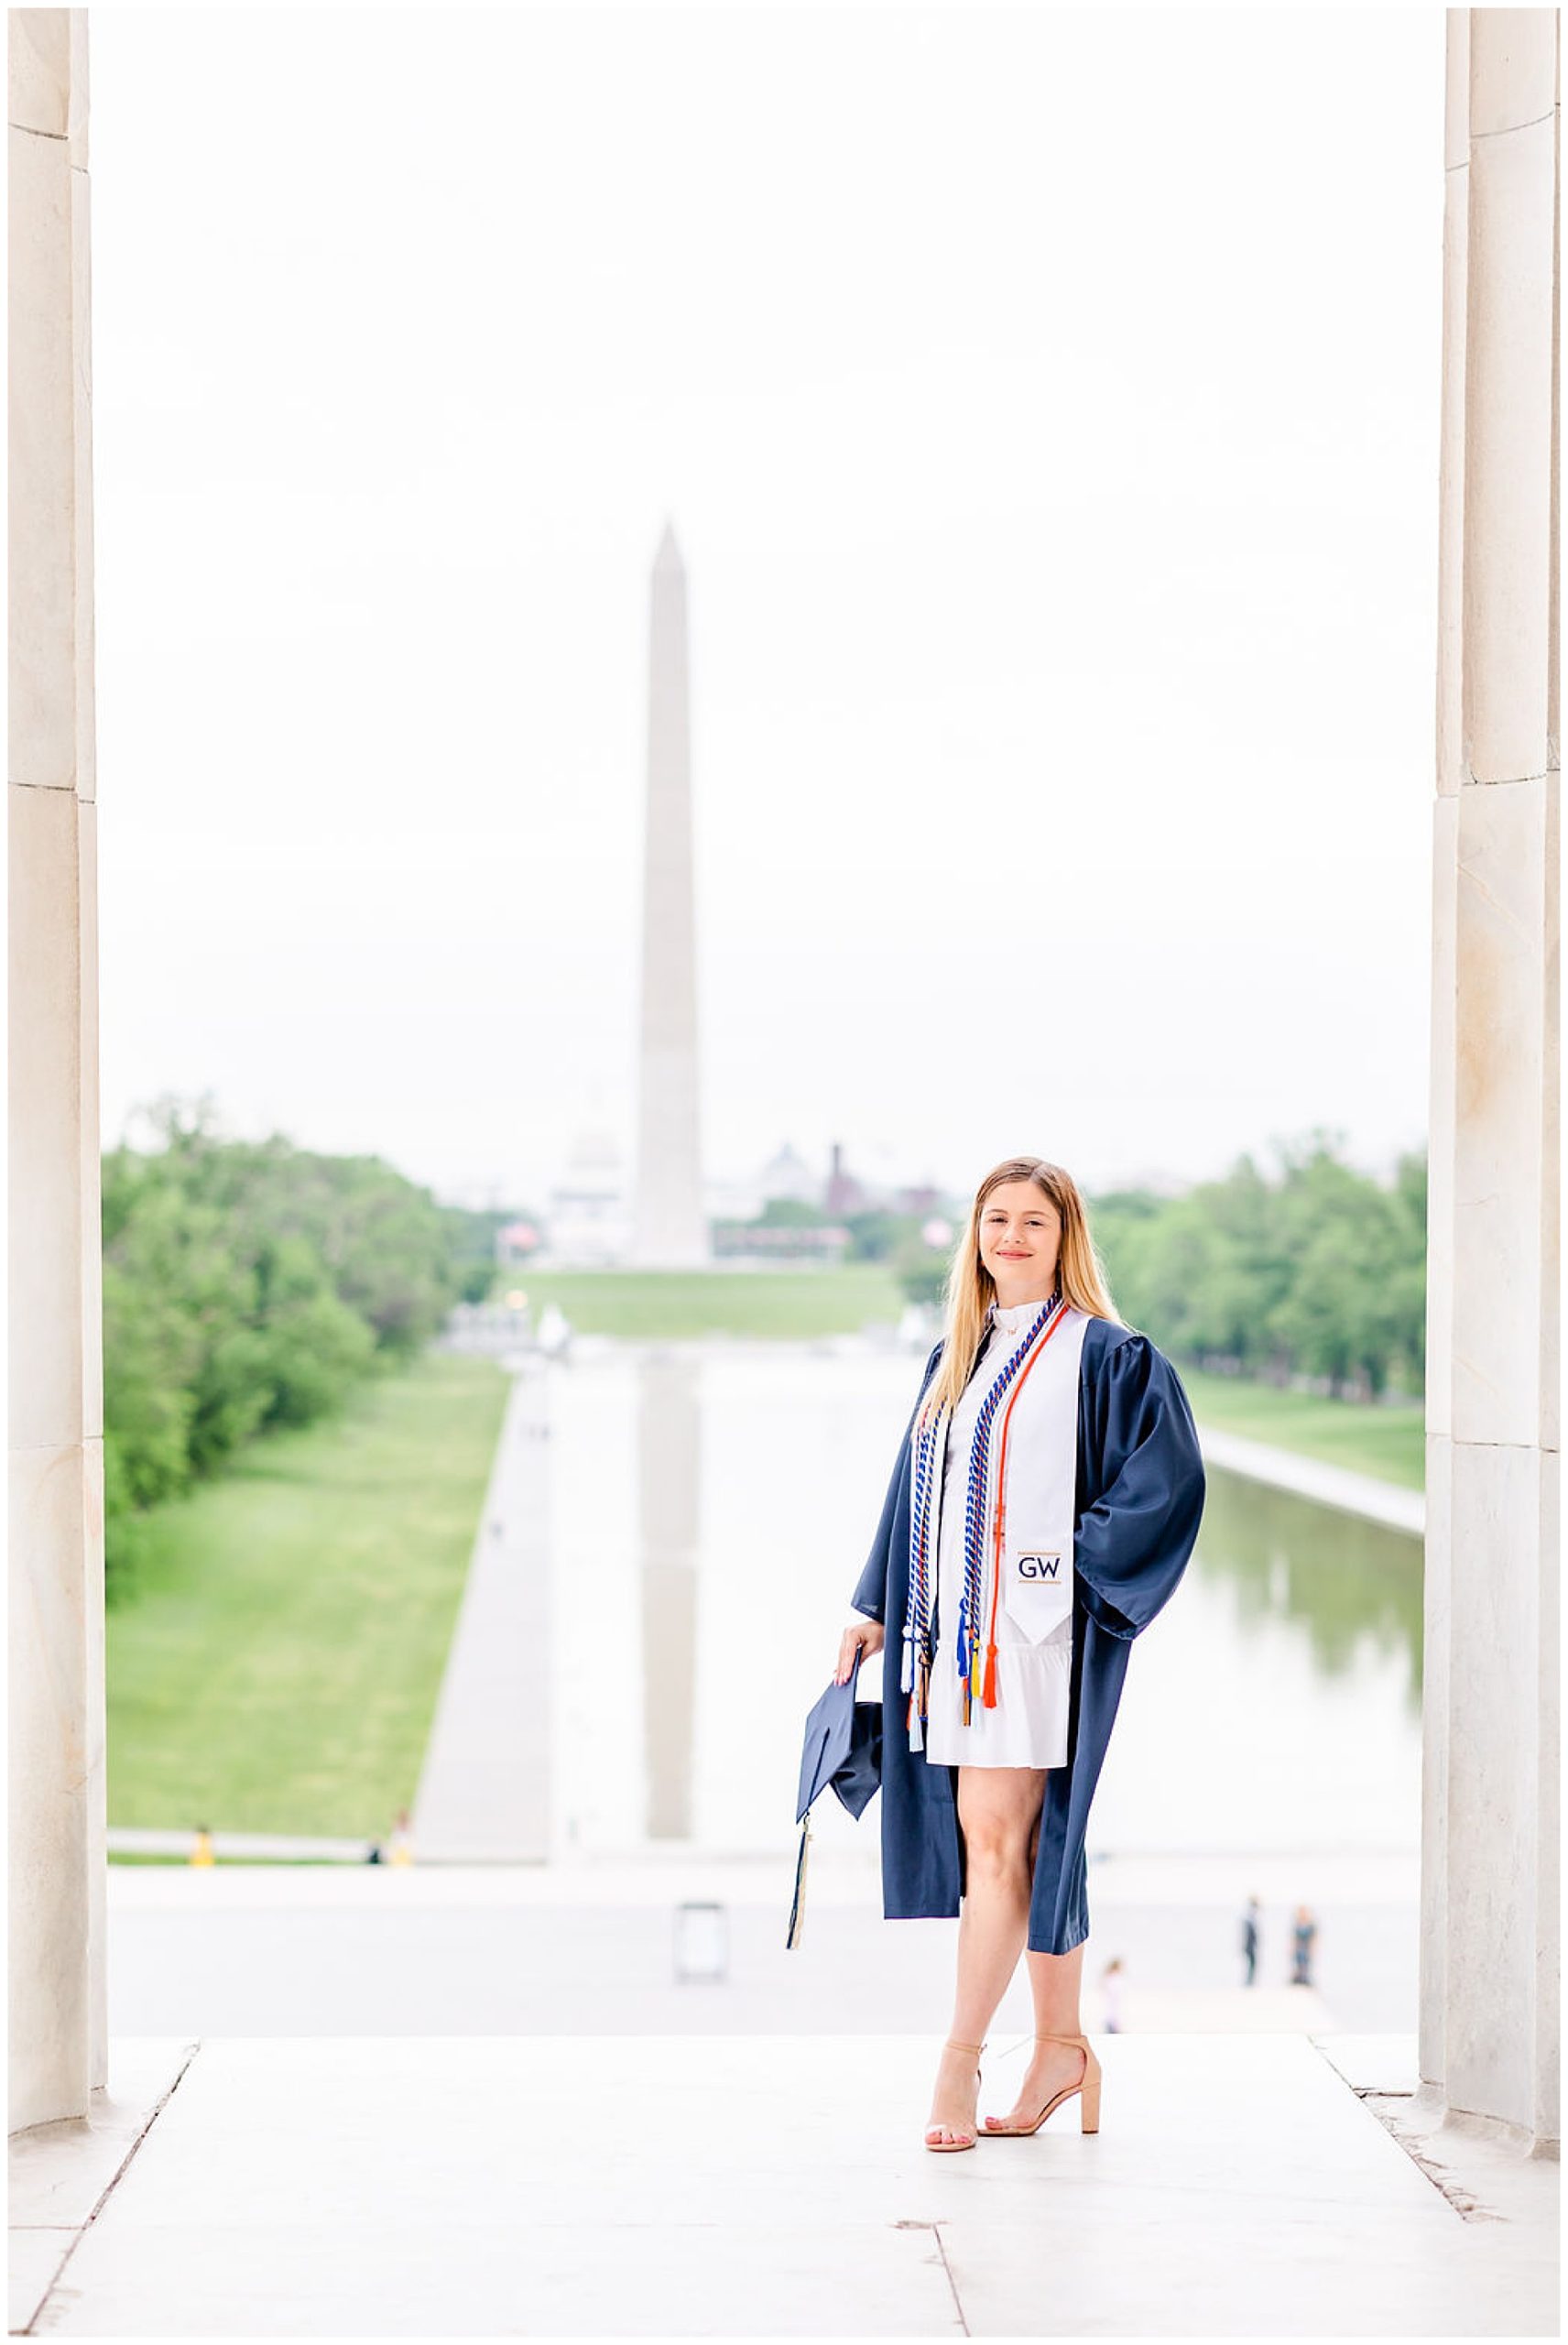 sister graduation photo session, Lincoln Memorial graduation photos, sibling graduation photos, magic hour graduation photos, Washington D.C. graduation photos, D.C graduates, Rachel E.H. Photographer, D.C. graduation photographer, woman with multiple cords, graduation stole and cords, woman wearing graduation gown, navy graduation gown